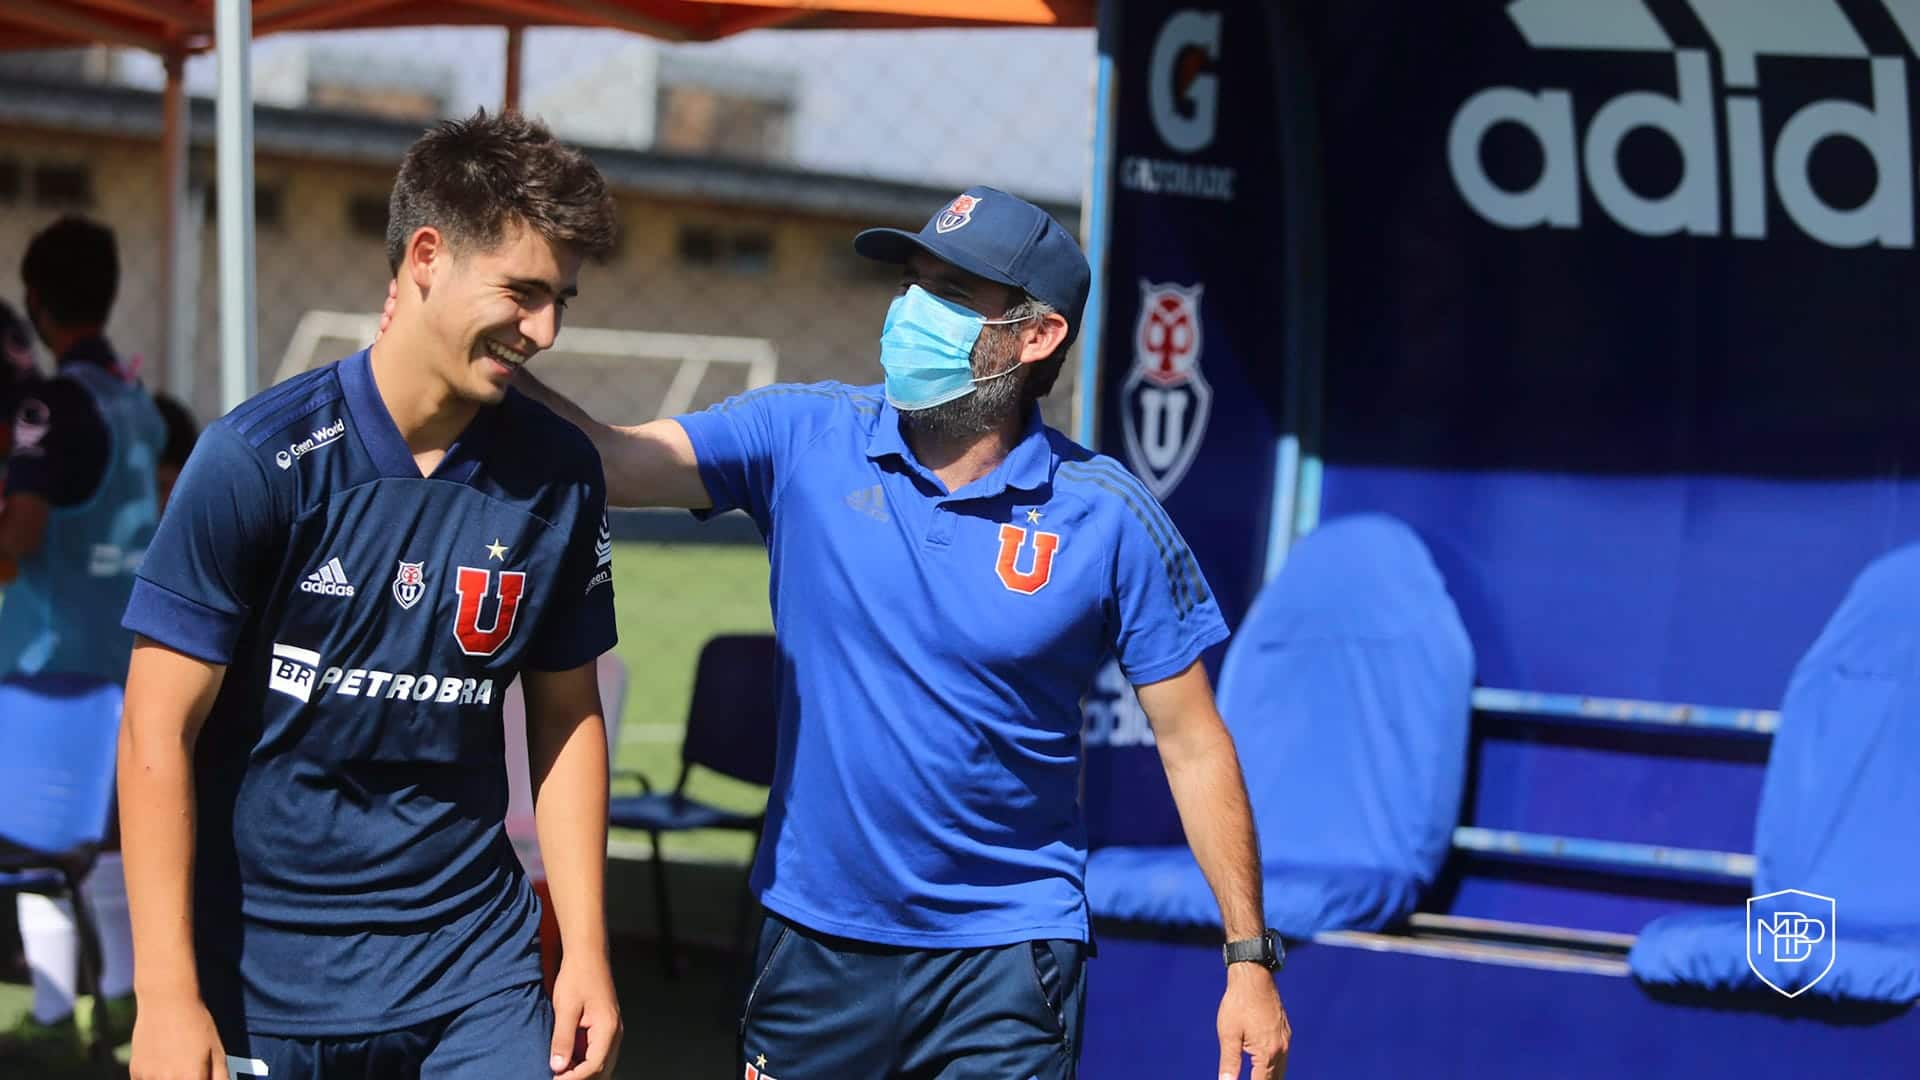 You are currently viewing MBP AND LA U: TOGETHER SHAPING THE FUTURE OF CHILEAN SOCCER